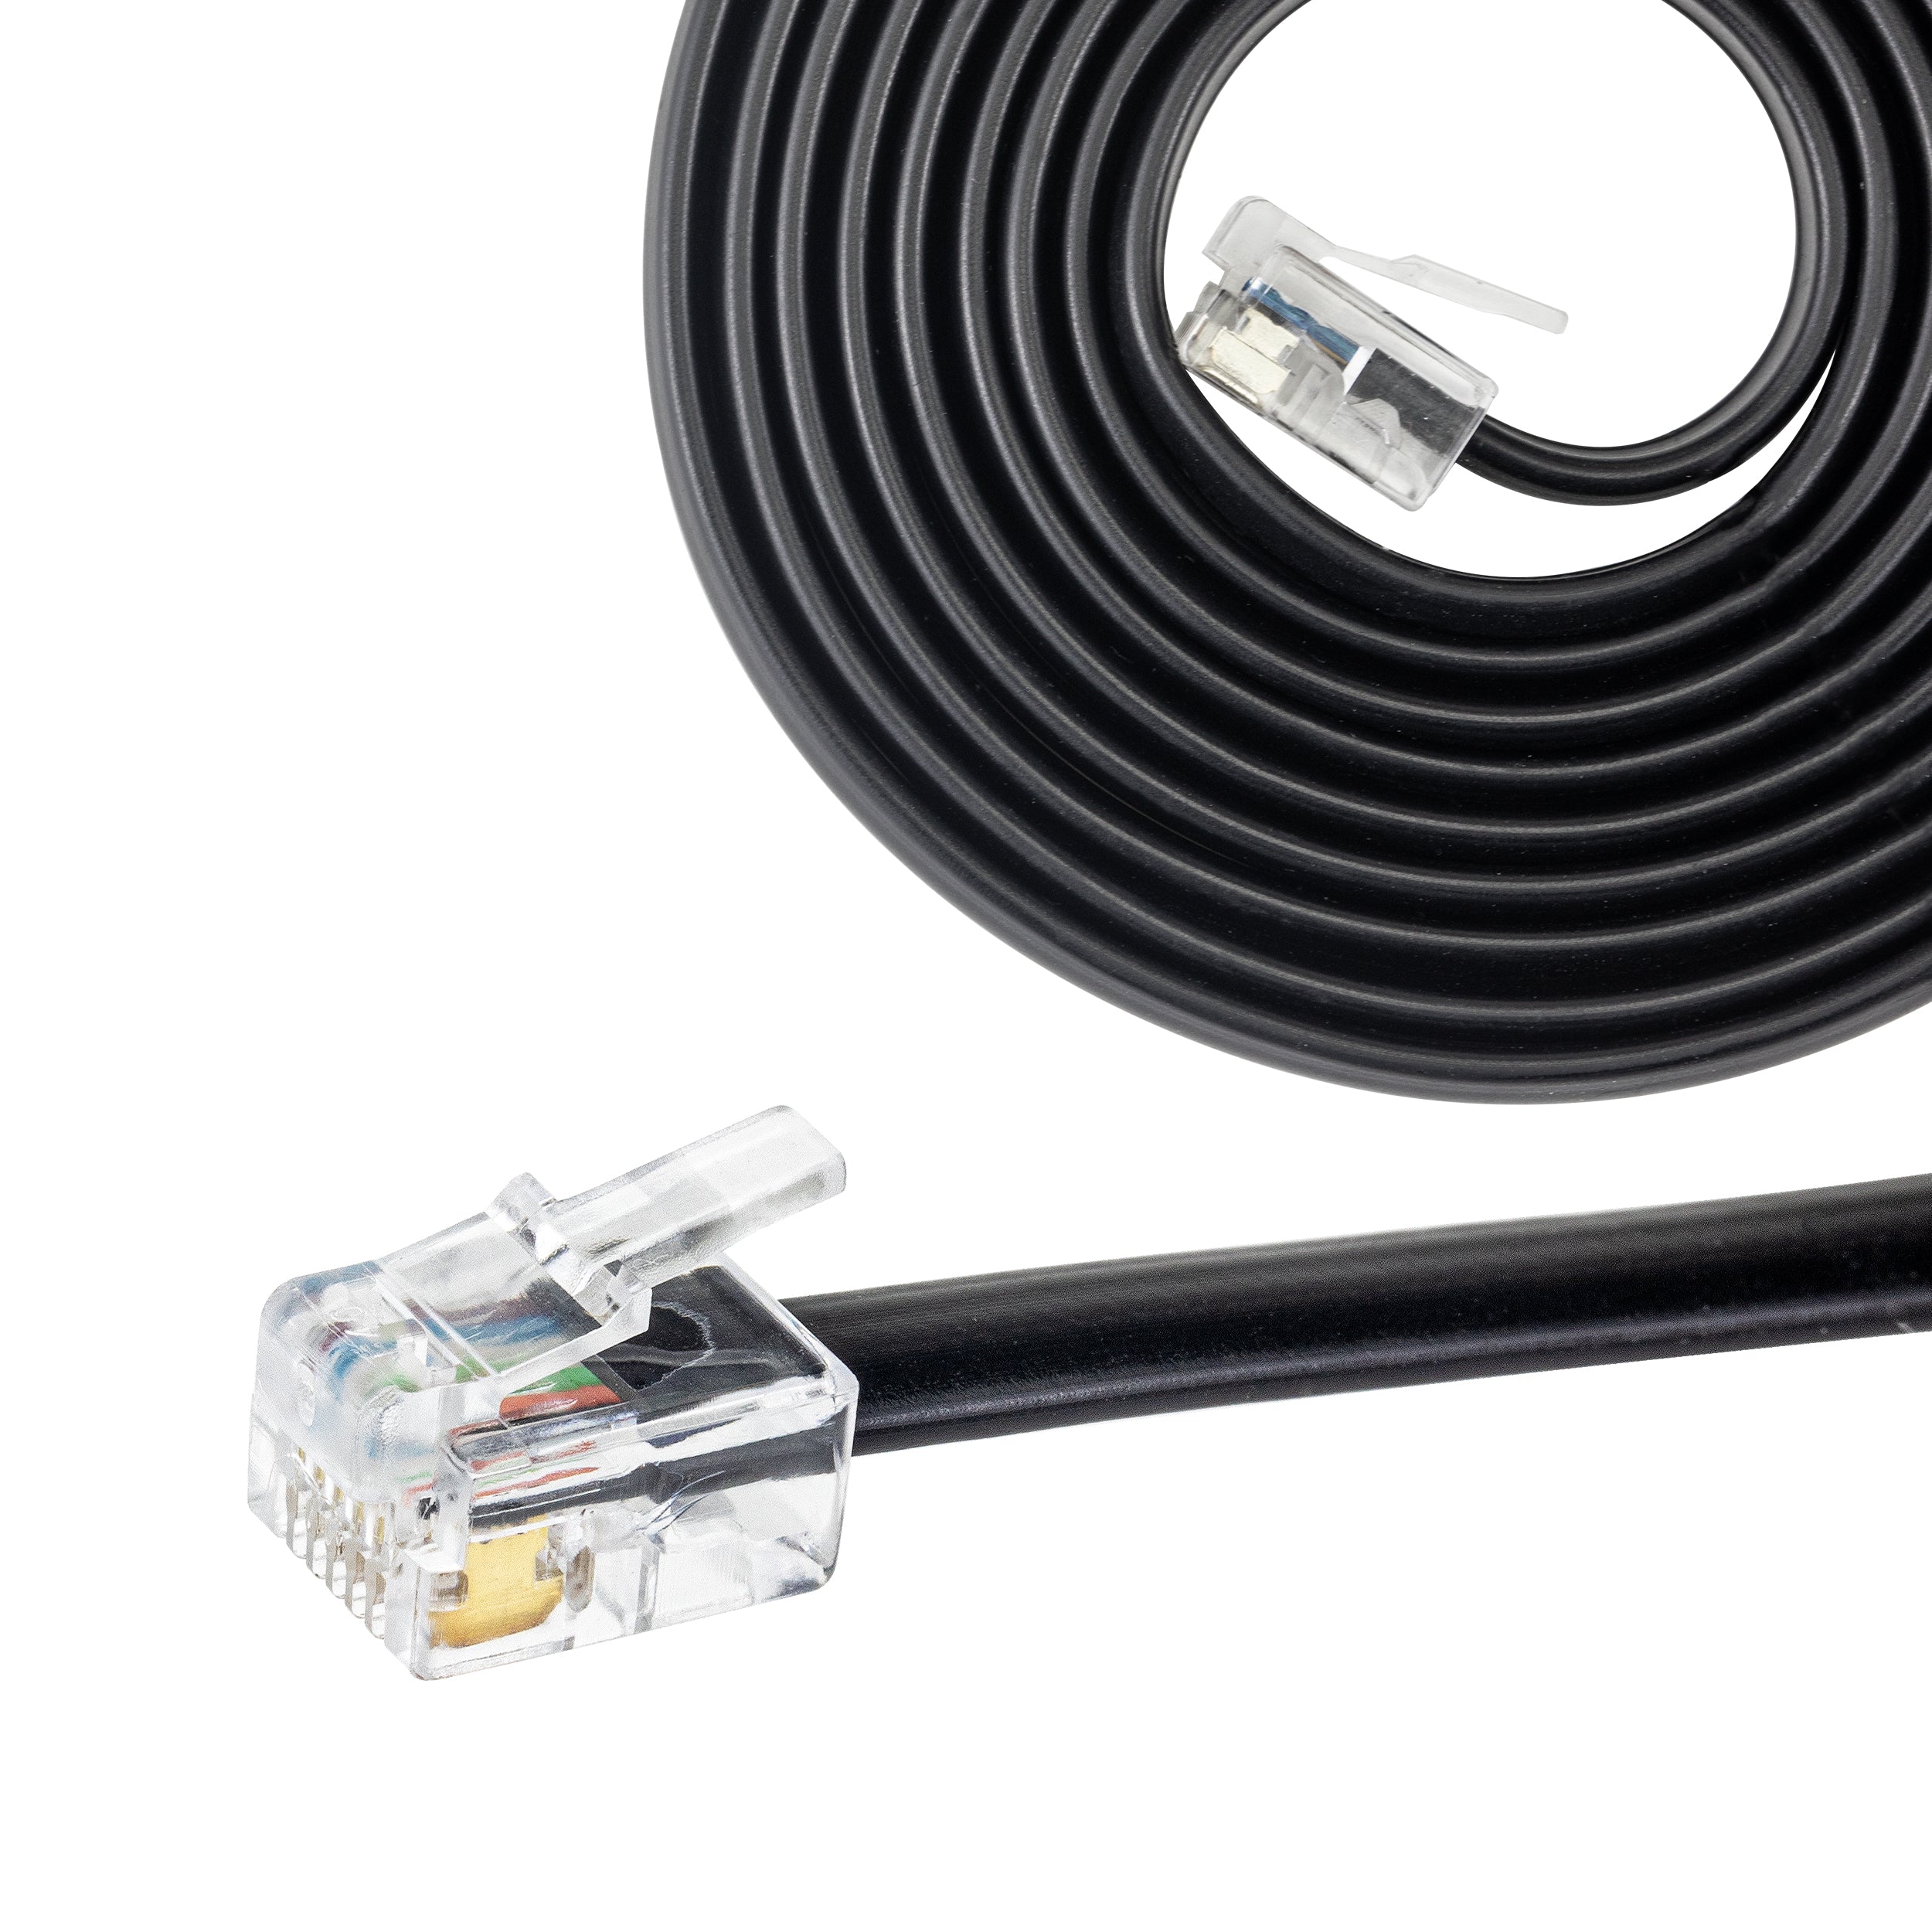 5 Feet RJ11 / RJ12 Data Cable - Heavy Duty 6-Pins High-Speed Extension for  Cash Register Drawer, Telephone, Modem, Fax, Printers, and More - Drawer